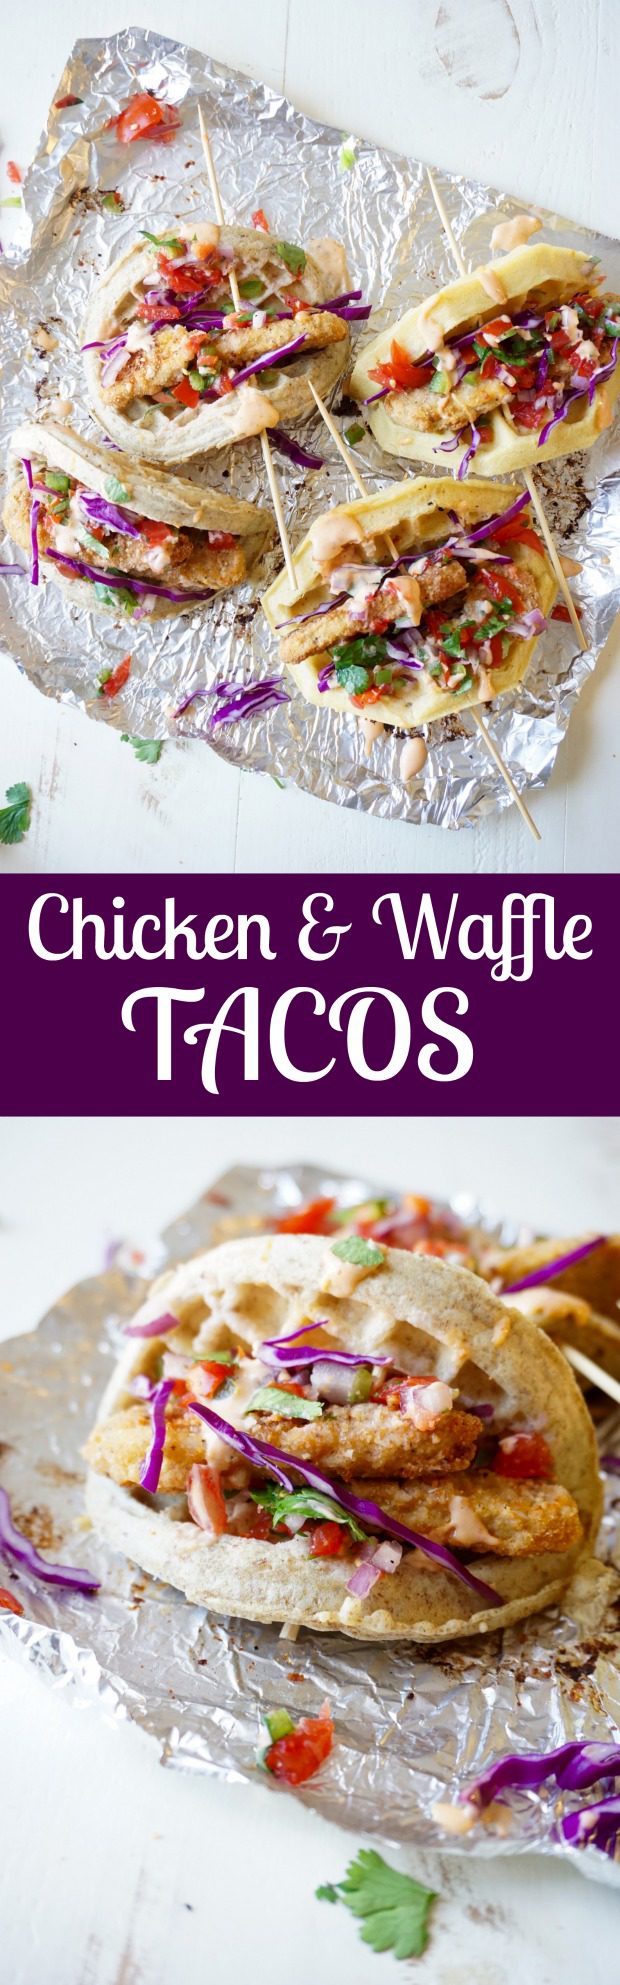 Chicken and Waffle Tacos recipe | TheFoodiePatootie.com